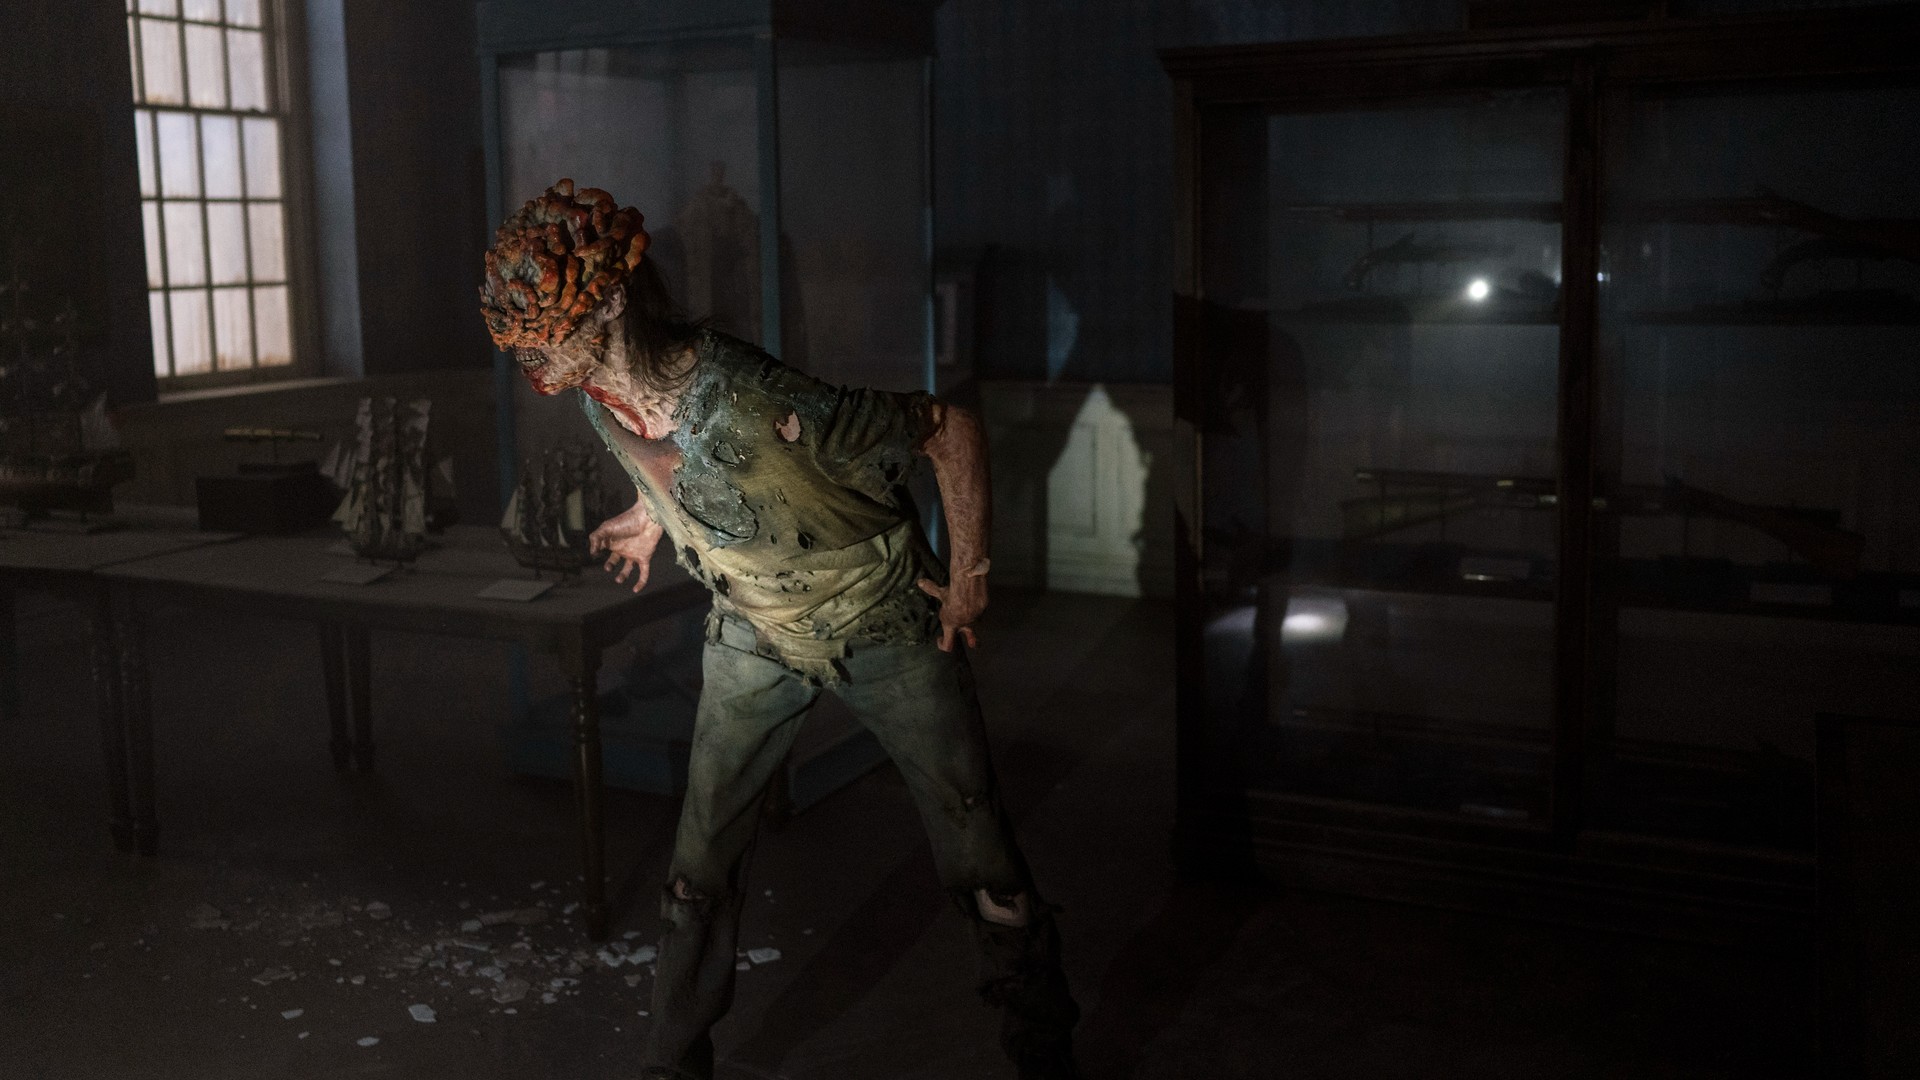 The Last Of Us: Essential Moments The HBO Series Shouldn't Change